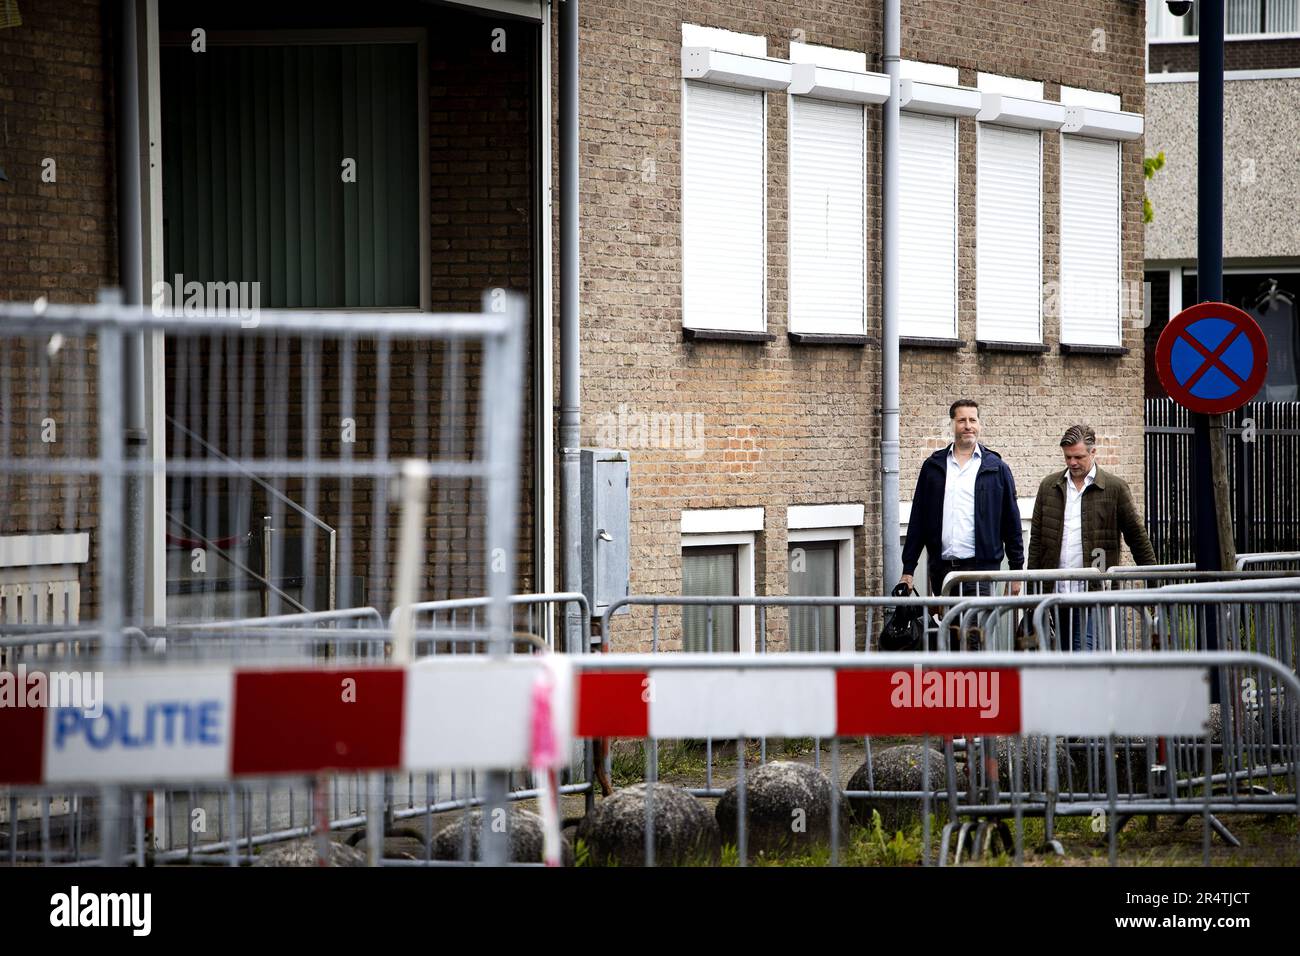 AMSTERDAM - Lawyers Mark Dunsbergen (l) and Robert van t Land (r) arrive at the court for the continuation of the extensive Marengo liquidation process, for the plea in the case of Said R. Against their client and also the alleged right-hand man of main suspect Ridouan Taghi has been sentenced to life imprisonment. ANP RAMON VAN FLYMEN netherlands out - belgium out Stock Photo